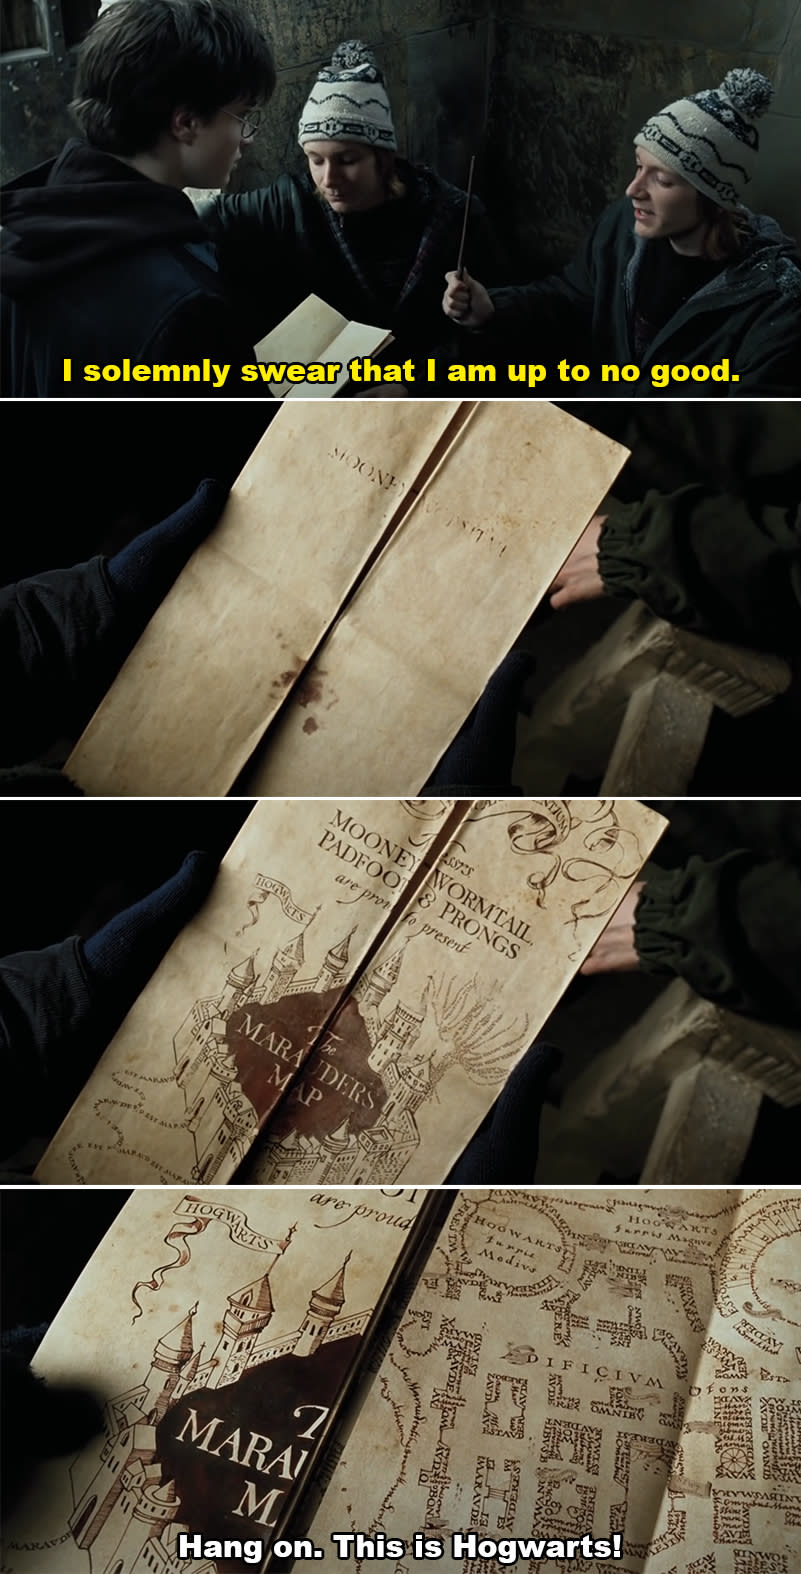 Harry Potter shows Marauder's Map to Hermione and Ron, who look intrigued. The map is detailed with room names and footprints